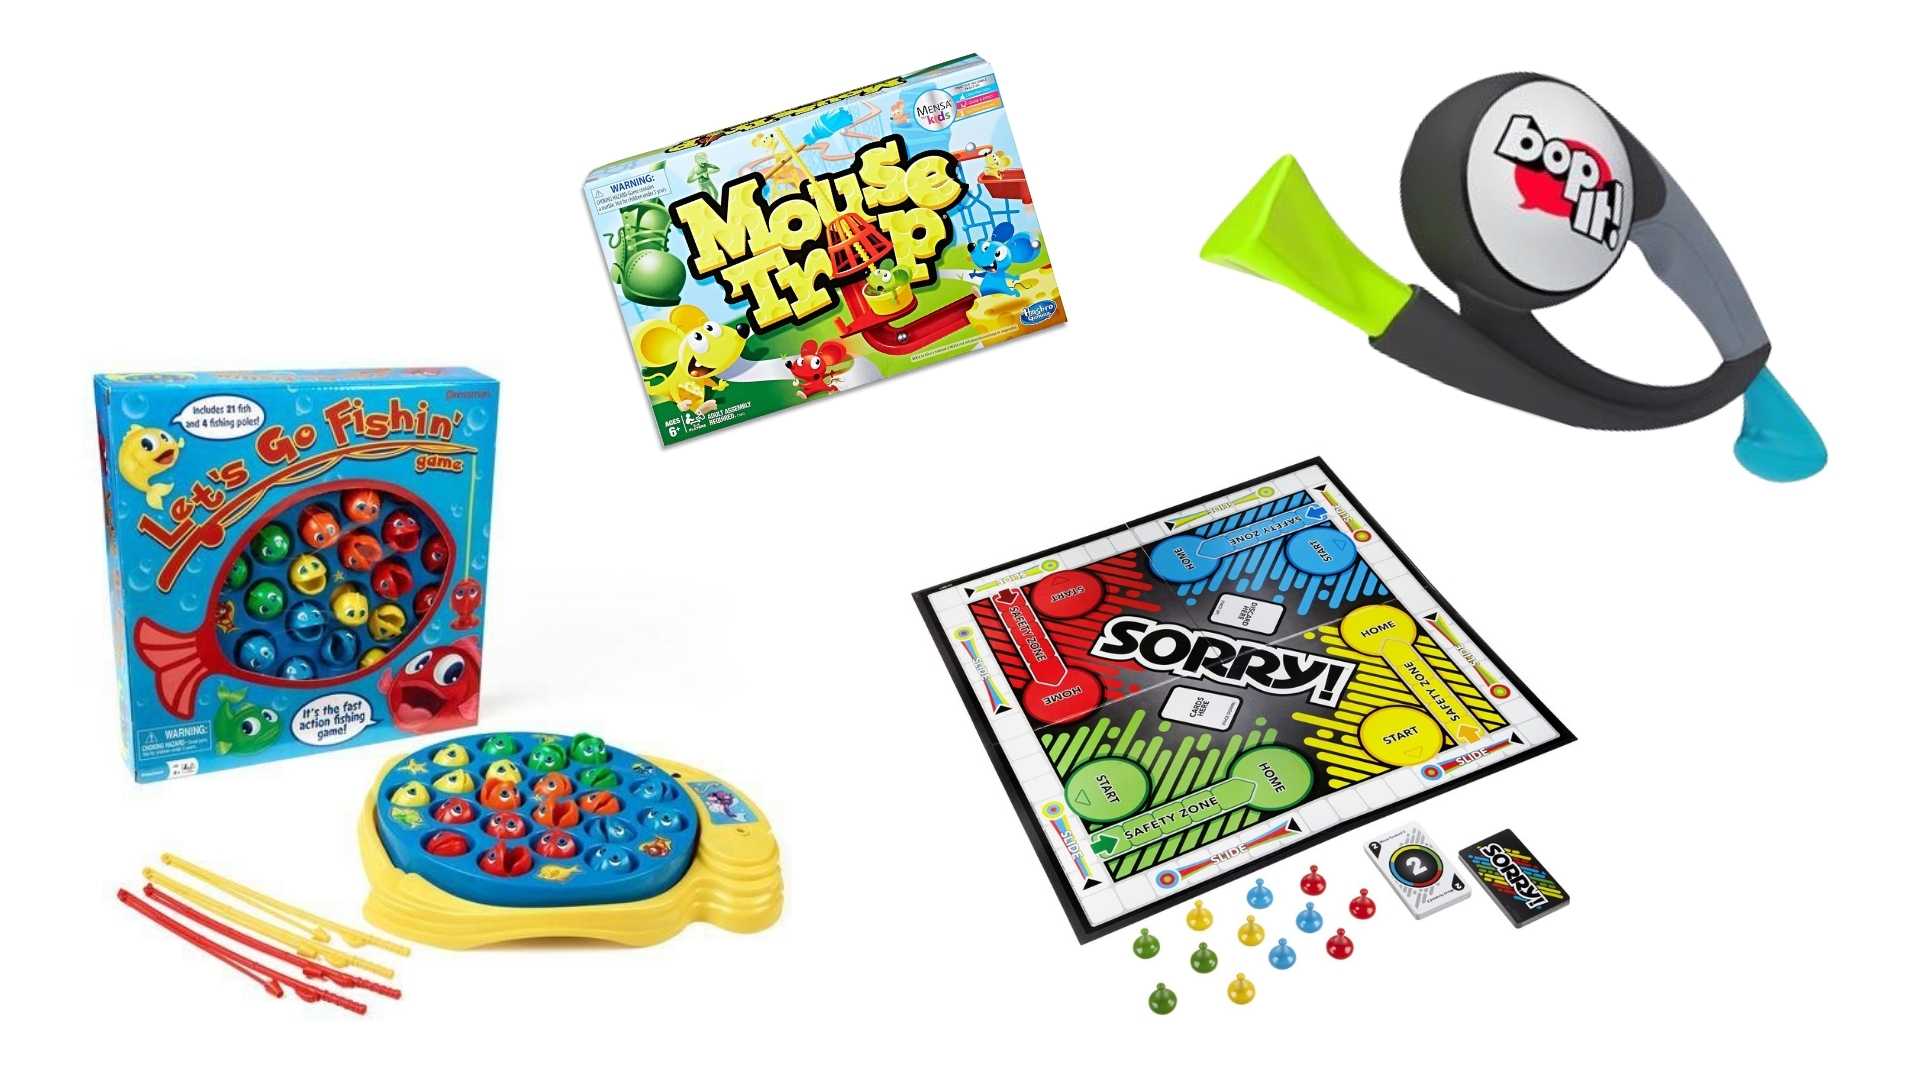 A Let's Go Fishing game, Mousetrap board game, Sorry! board game and a Bop It game.